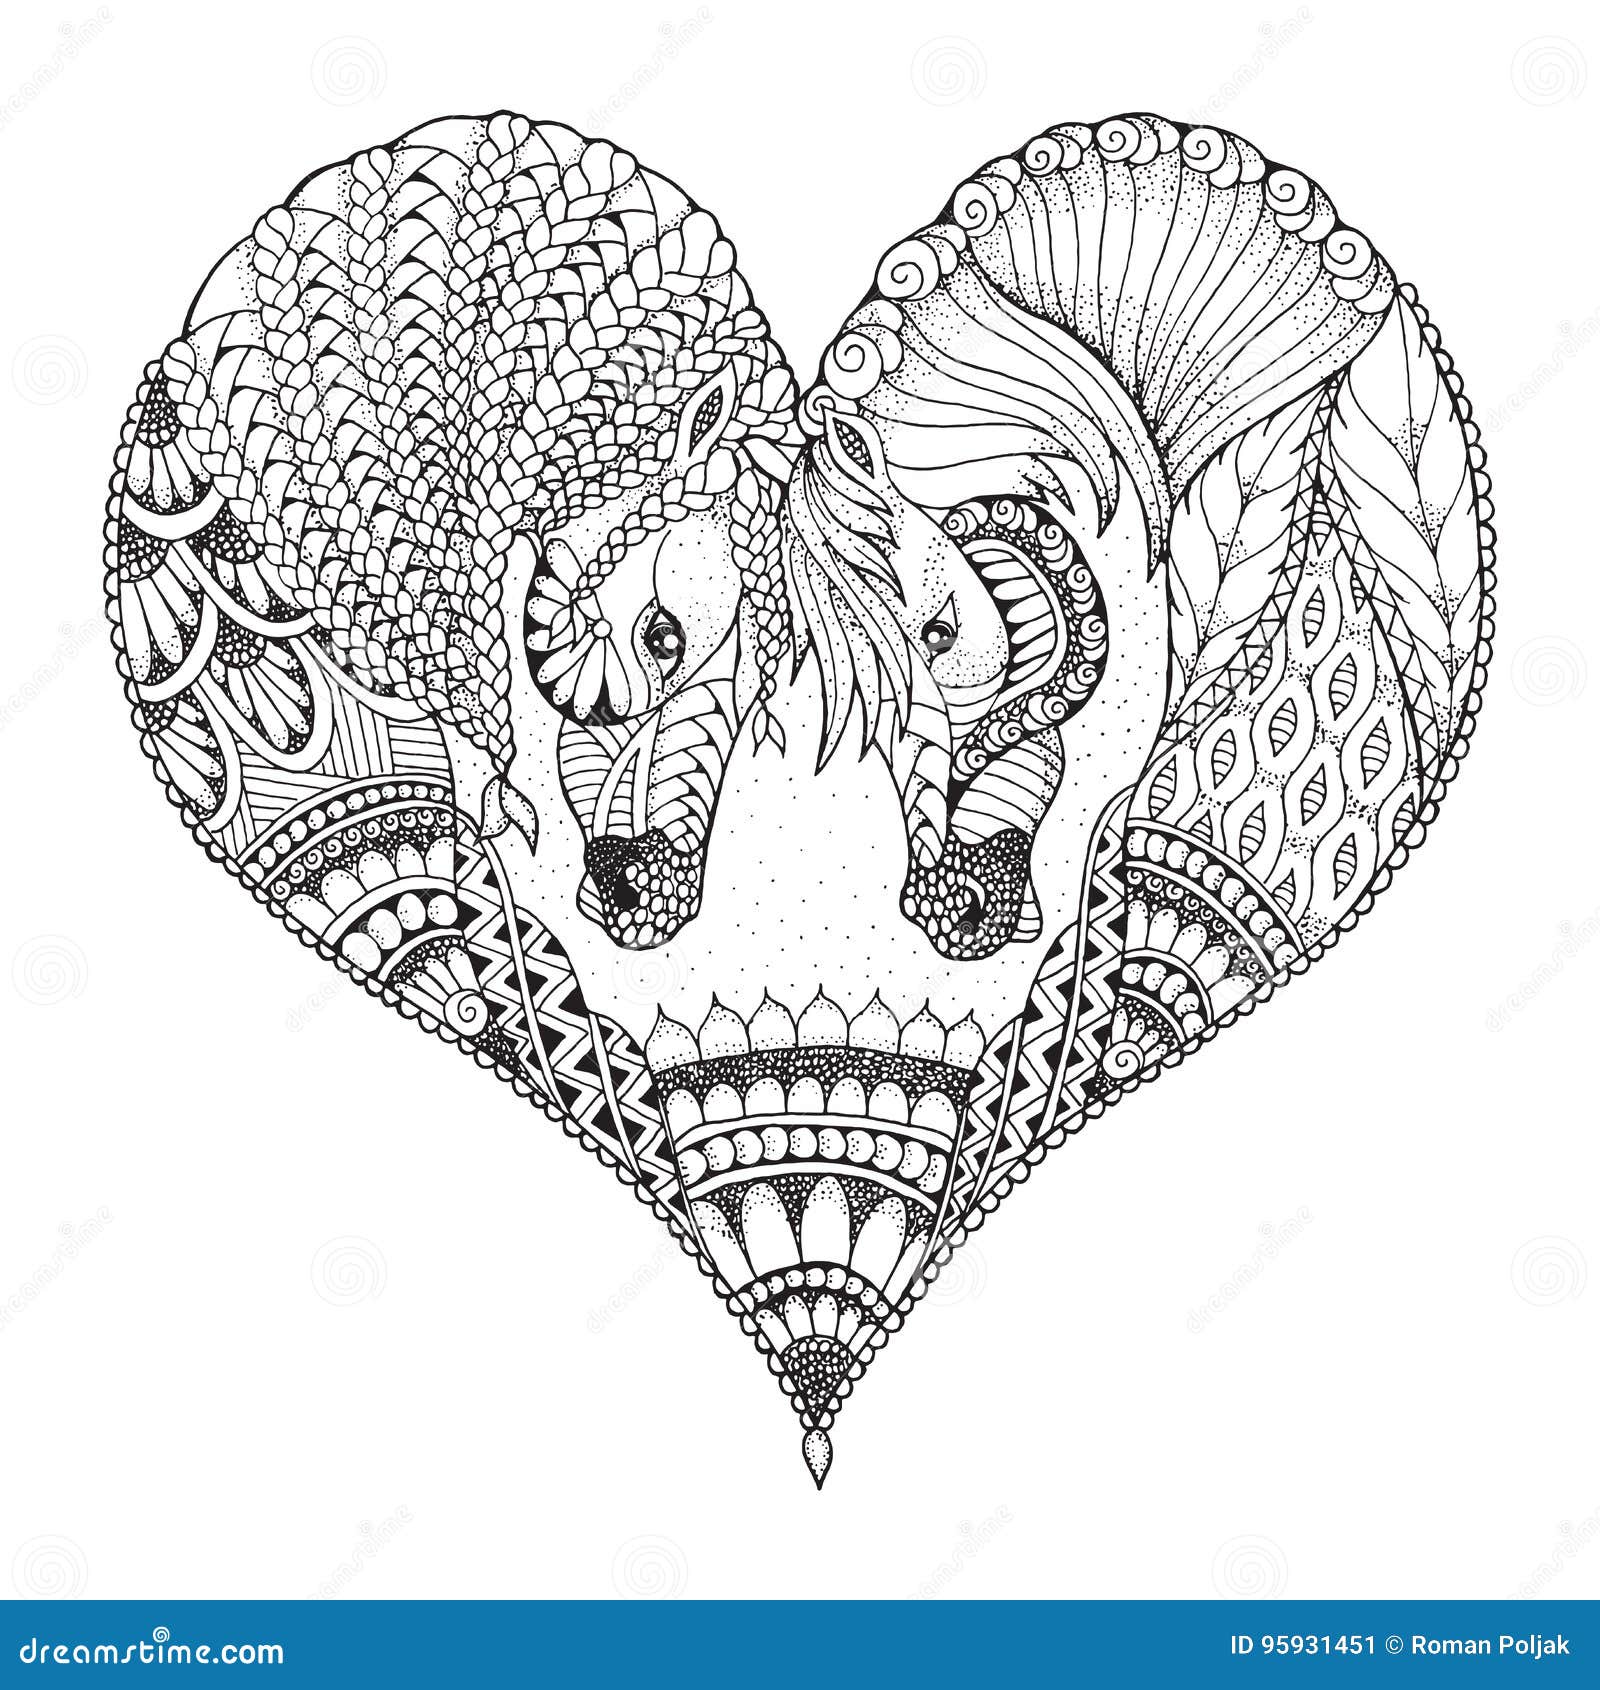 two horses showing affection in a heart . zentangle